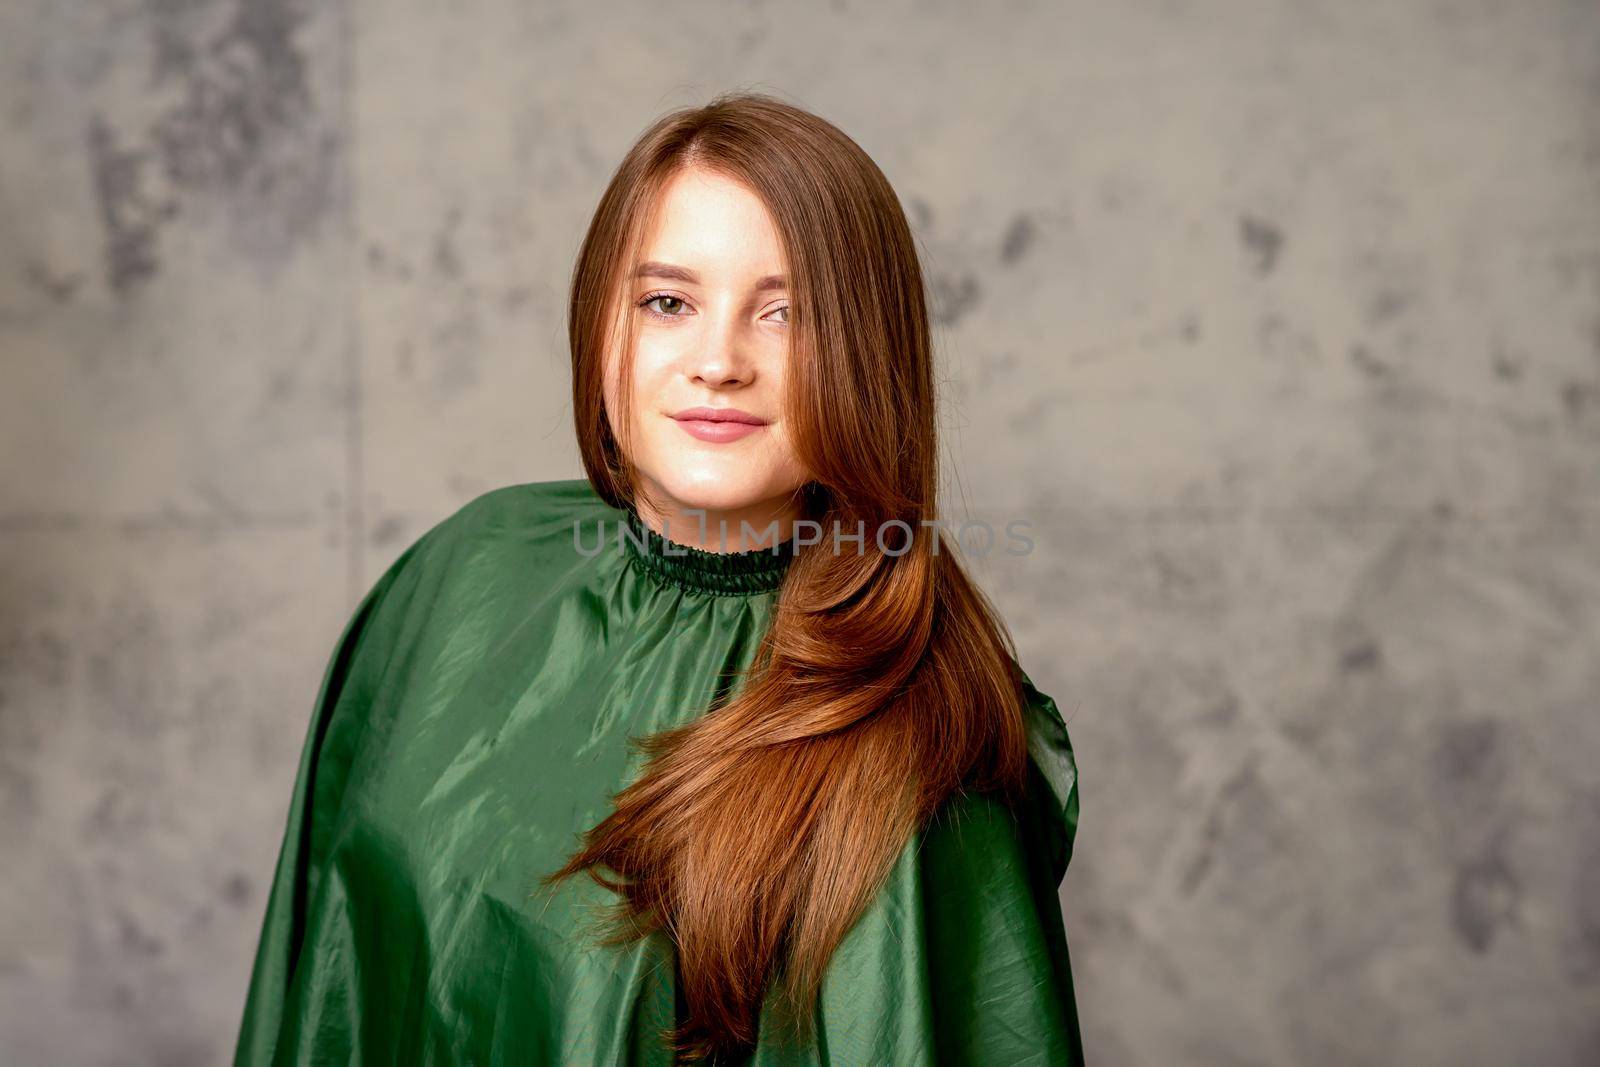 The fashionable young woman. Portrait of the beautiful female model with long hair and makeup. Beauty young caucasian woman with a brown curly hairstyle on the background of a gray wall